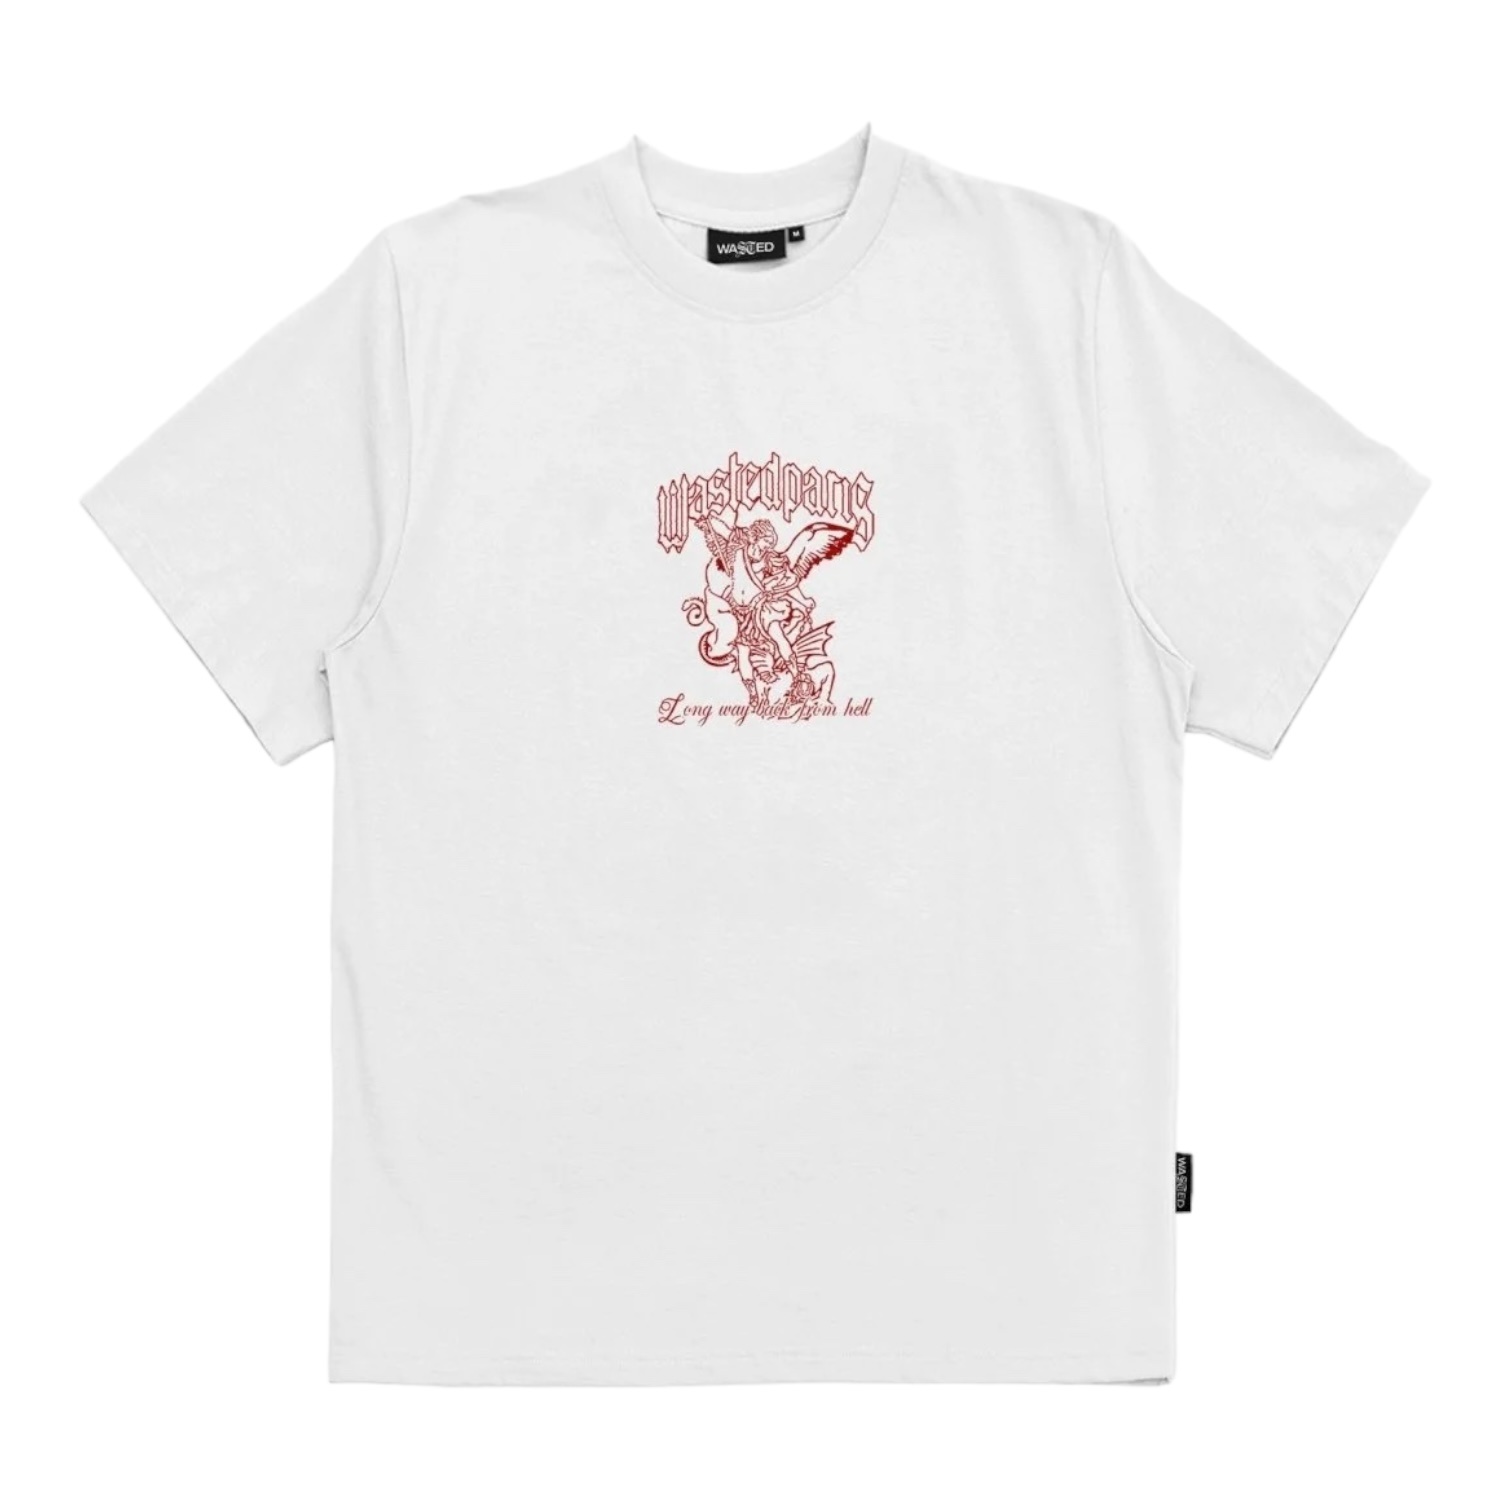 Wasted Paris From Hell Tee - White